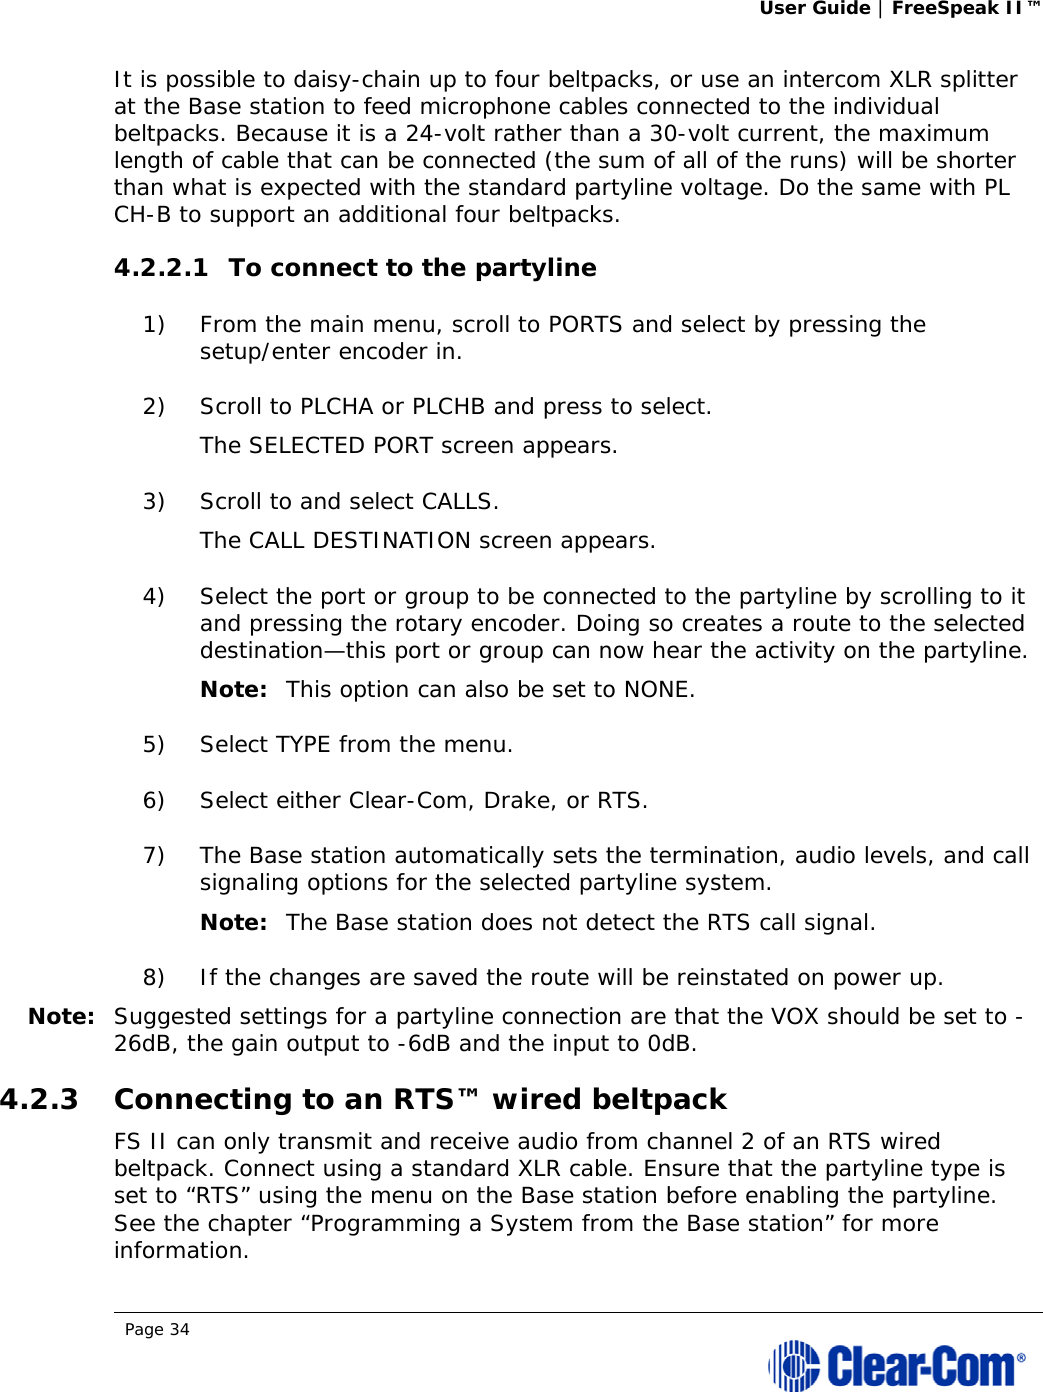 User Guide | FreeSpeak II™  Page 34  It is possible to daisy-chain up to four beltpacks, or use an intercom XLR splitter at the Base station to feed microphone cables connected to the individual beltpacks. Because it is a 24-volt rather than a 30-volt current, the maximum length of cable that can be connected (the sum of all of the runs) will be shorter than what is expected with the standard partyline voltage. Do the same with PL CH-B to support an additional four beltpacks. 4.2.2.1 To connect to the partyline 1) From the main menu, scroll to PORTS and select by pressing the setup/enter encoder in. 2) Scroll to PLCHA or PLCHB and press to select.  The SELECTED PORT screen appears.  3) Scroll to and select CALLS.  The CALL DESTINATION screen appears.  4) Select the port or group to be connected to the partyline by scrolling to it and pressing the rotary encoder. Doing so creates a route to the selected destination—this port or group can now hear the activity on the partyline.  Note: This option can also be set to NONE. 5) Select TYPE from the menu.  6) Select either Clear-Com, Drake, or RTS.  7) The Base station automatically sets the termination, audio levels, and call signaling options for the selected partyline system.  Note: The Base station does not detect the RTS call signal. 8) If the changes are saved the route will be reinstated on power up.  Note: Suggested settings for a partyline connection are that the VOX should be set to -26dB, the gain output to -6dB and the input to 0dB. 4.2.3 Connecting to an RTS™ wired beltpack FS II can only transmit and receive audio from channel 2 of an RTS wired beltpack. Connect using a standard XLR cable. Ensure that the partyline type is set to “RTS” using the menu on the Base station before enabling the partyline. See the chapter “Programming a System from the Base station” for more information.  